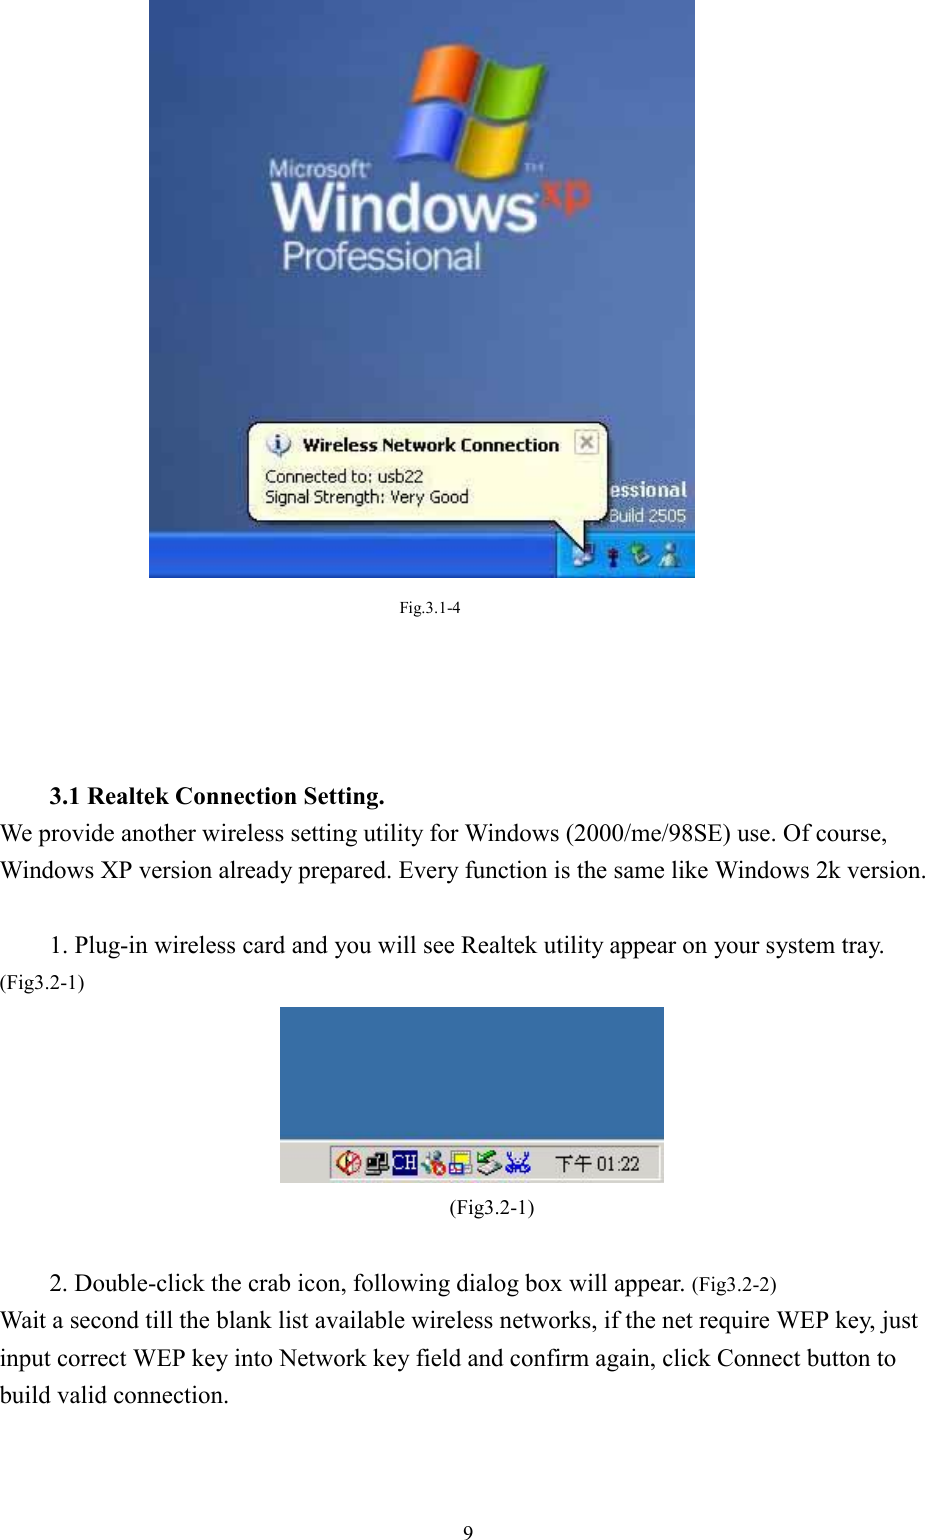 9Fig.3.1-43.1 Realtek Connection Setting.We provide another wireless setting utility for Windows (2000/me/98SE) use. Of course,Windows XP version already prepared. Every function is the same like Windows 2k version.1. Plug-in wireless card and you will see Realtek utility appear on your system tray.(Fig3.2-1)(Fig3.2-1)2. Double-click the crab icon, following dialog box will appear. (Fig3.2-2)Wait a second till the blank list available wireless networks, if the net require WEP key, justinput correct WEP key into Network key field and confirm again, click Connect button tobuild valid connection.